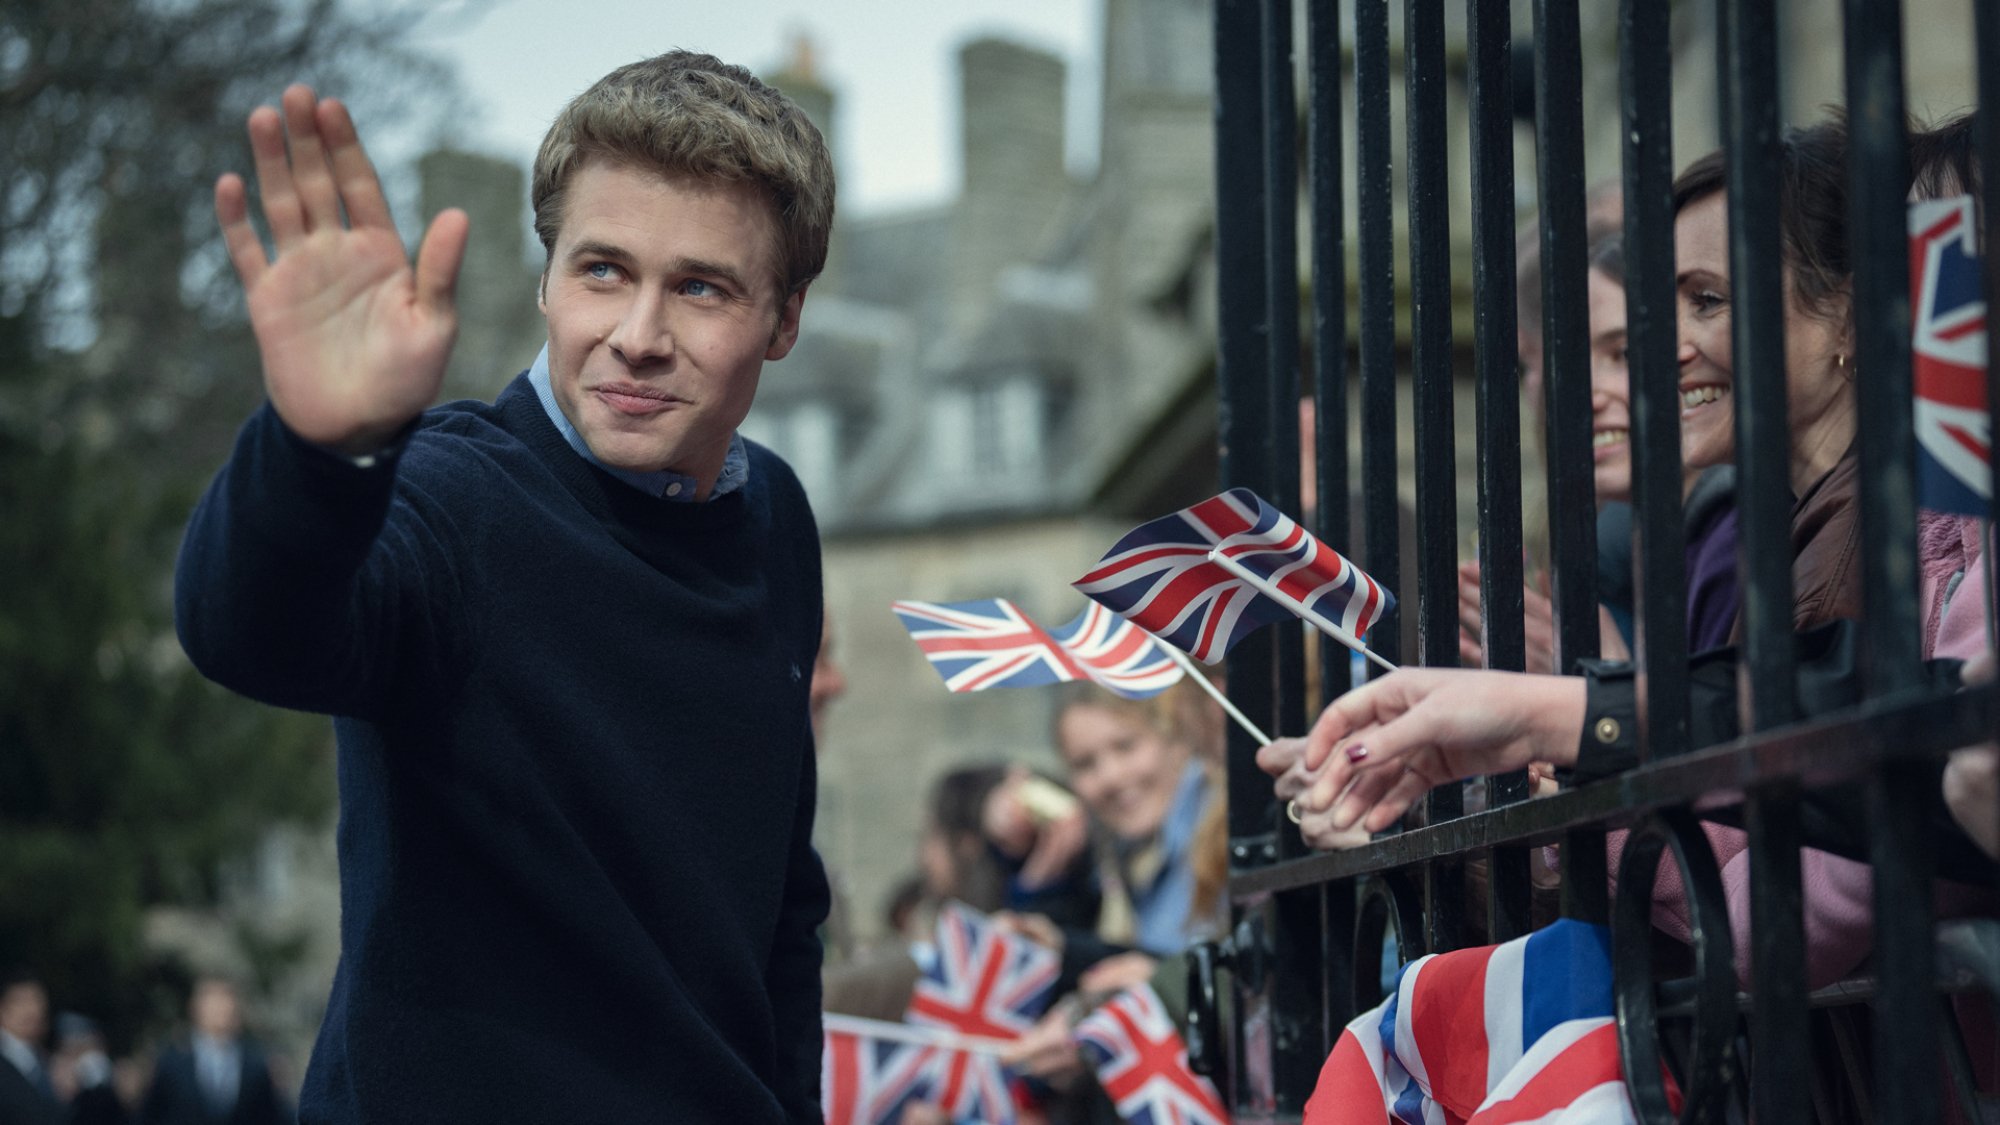 An actor resembling Prince William waves to fans with the Union Jack flag